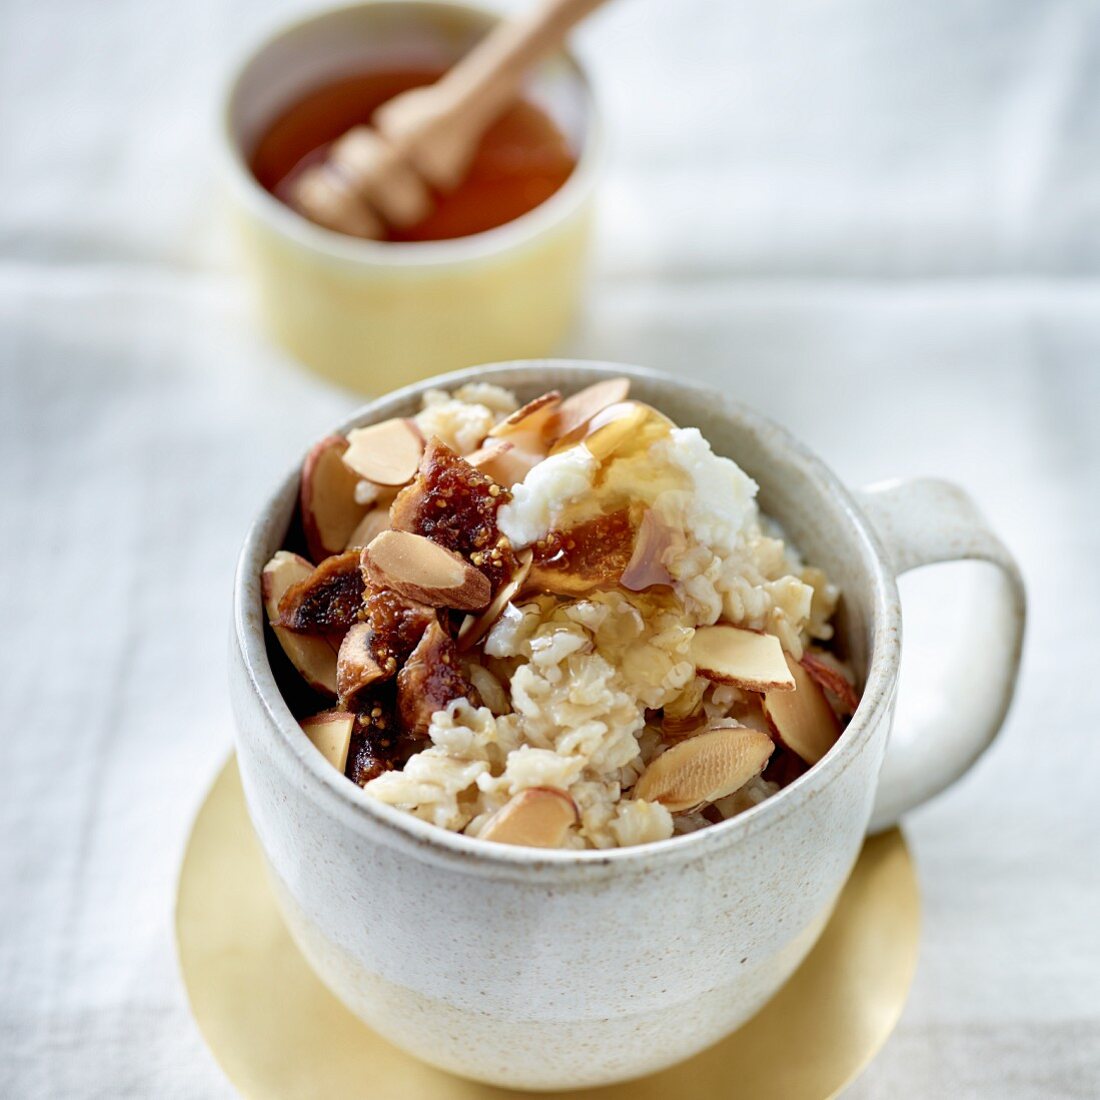 Porridge with ricotta and figs